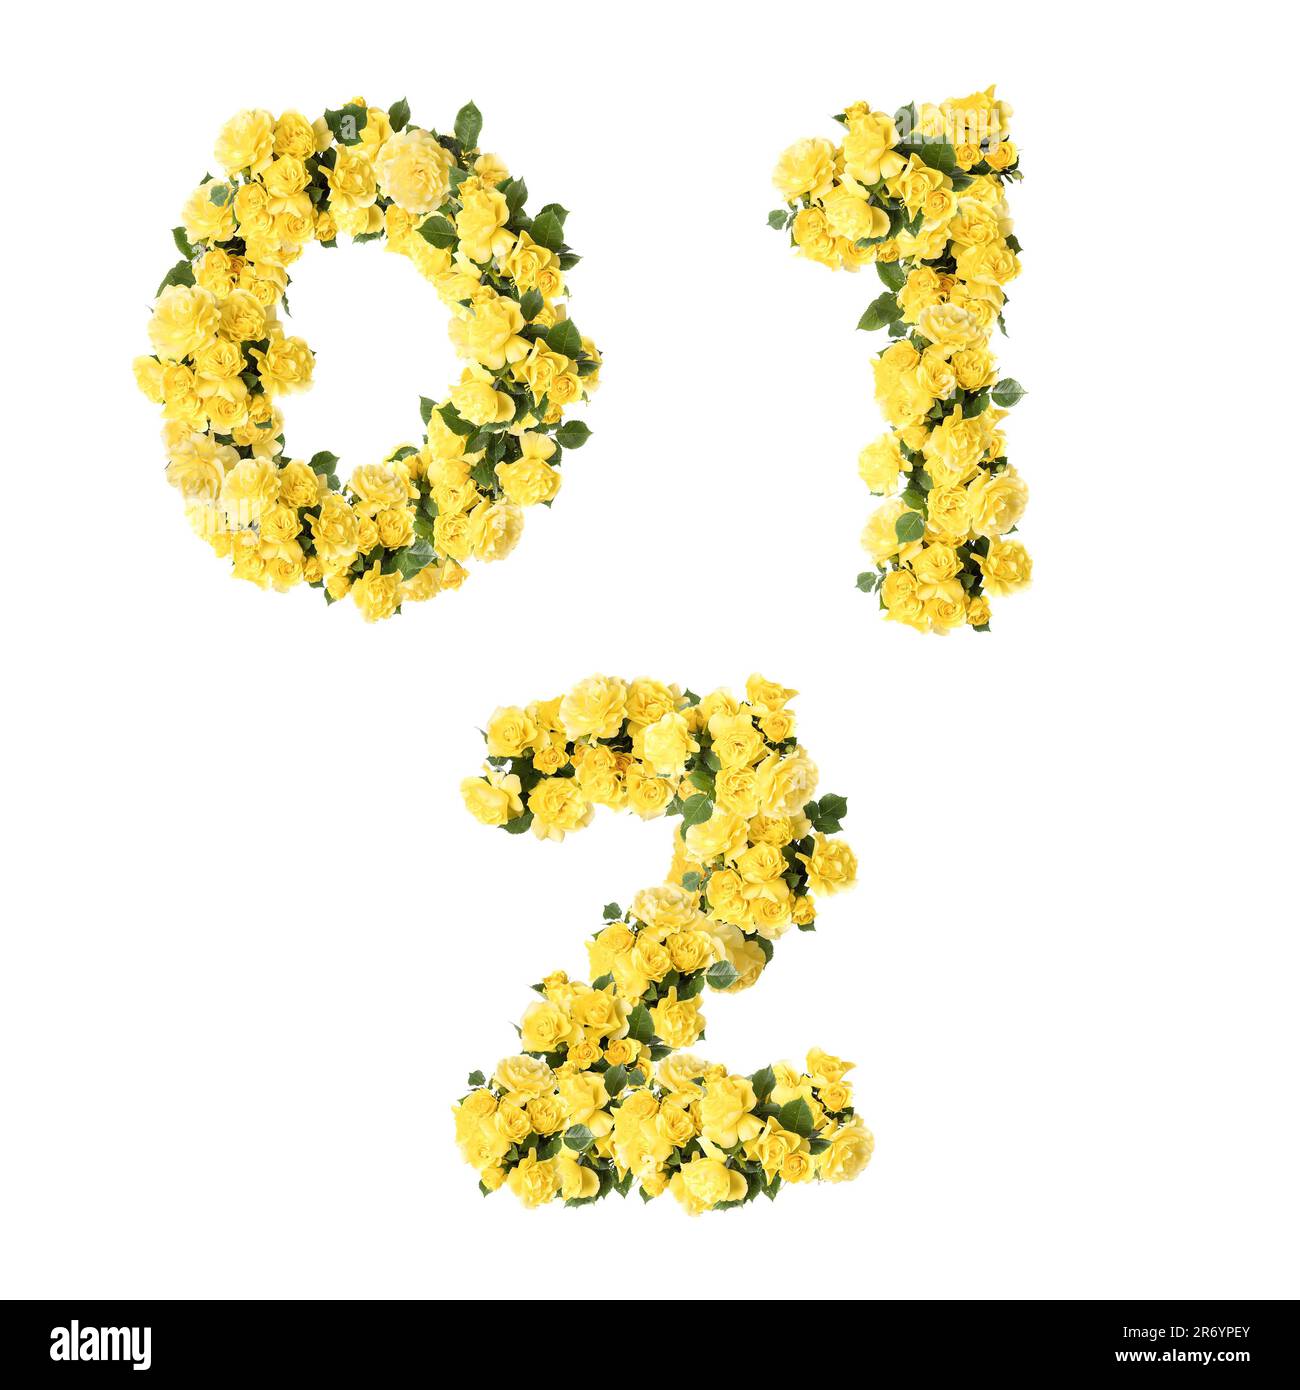 3D illustration of yellow rose flowers capital letter alphabet - digits 0-2 Stock Photo